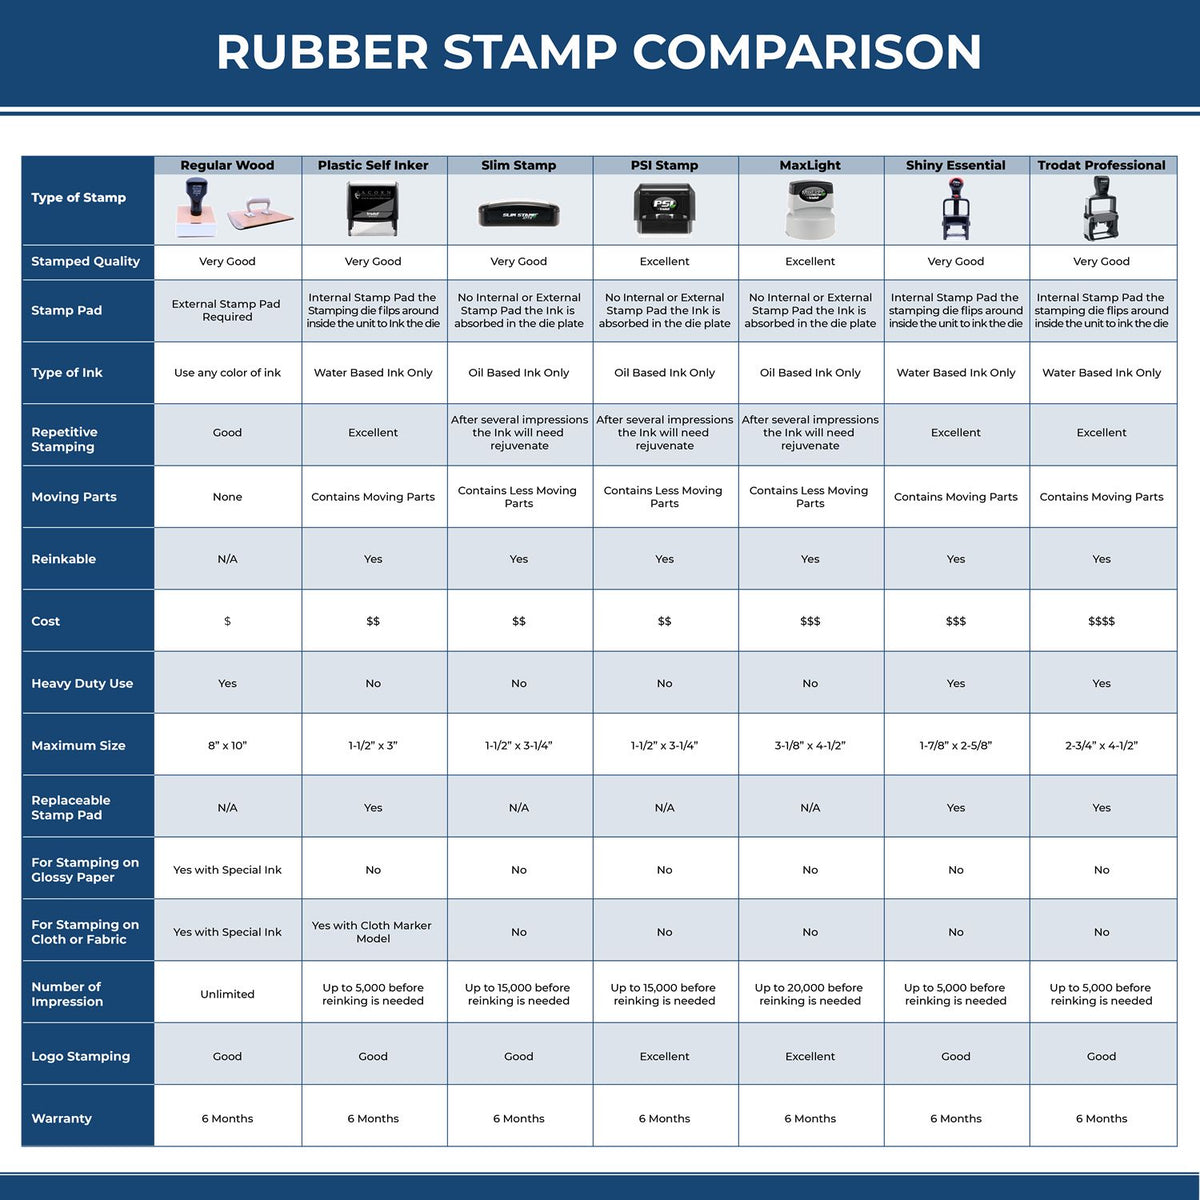 A comparison chart for the different types of mount models available for the Wooden Handle Wisconsin State Seal Notary Public Stamp.